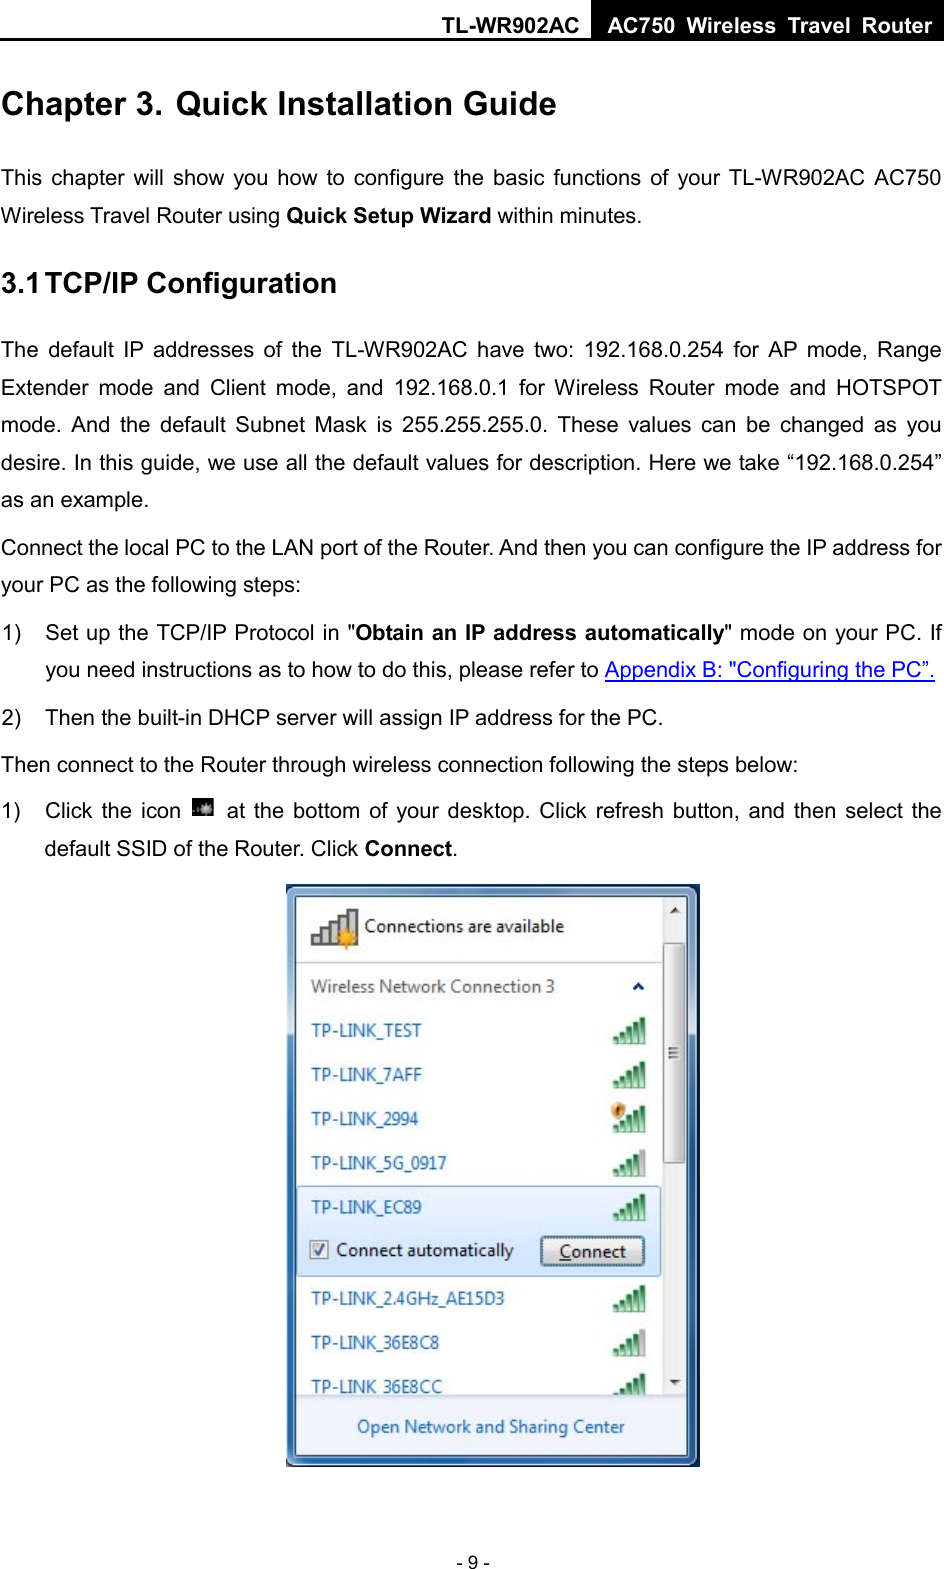 TL-WR902AC AC750  Wireless Travel Router  - 9 - Chapter 3. Quick Installation Guide This chapter will show you how to configure the basic functions of your TL-WR902AC AC750 Wireless Travel Router using Quick Setup Wizard within minutes. 3.1 TCP/IP Configuration The default IP addresses of the TL-WR902AC have two: 192.168.0.254 for AP mode, Range Extender mode and Client mode, and 192.168.0.1 for Wireless Router mode and HOTSPOT mode. And the default Subnet Mask is 255.255.255.0. These values can be changed as you desire. In this guide, we use all the default values for description. Here we take “192.168.0.254” as an example. Connect the local PC to the LAN port of the Router. And then you can configure the IP address for your PC as the following steps: 1) Set up the TCP/IP Protocol in &quot;Obtain an IP address automatically&quot; mode on your PC. If you need instructions as to how to do this, please refer to Appendix B: &quot;Configuring the PC”. 2) Then the built-in DHCP server will assign IP address for the PC. Then connect to the Router through wireless connection following the steps below: 1) Click the icon   at the bottom of your desktop. Click refresh button, and then select the default SSID of the Router. Click Connect.  